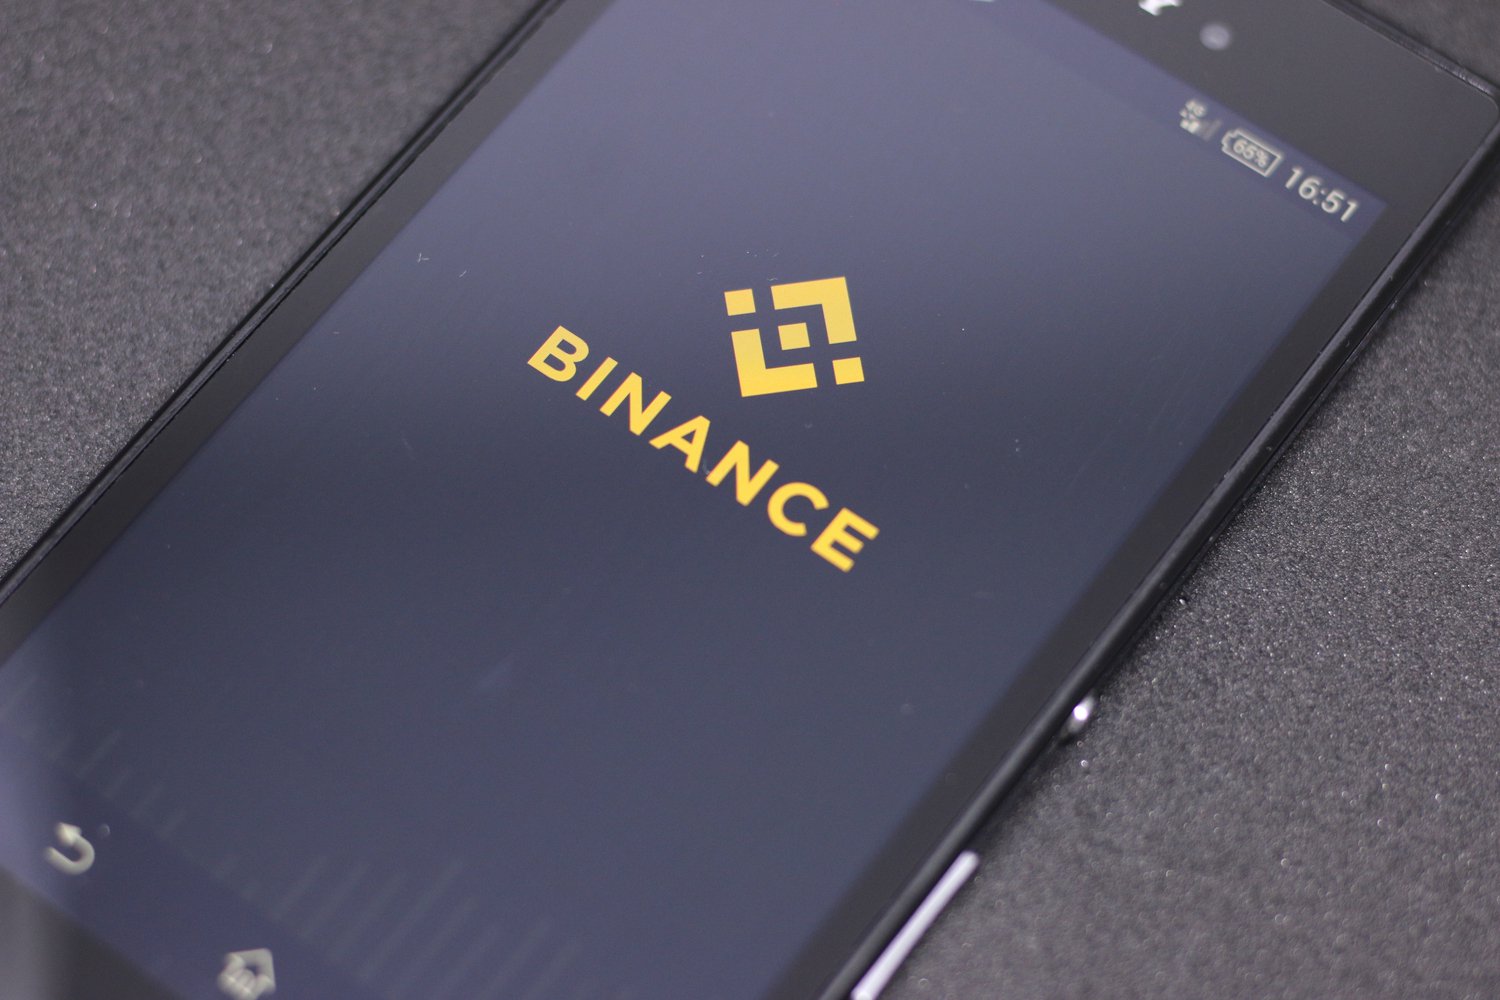 Binance CFO Says Crypto Exchange Looking To Add New Stablecoins